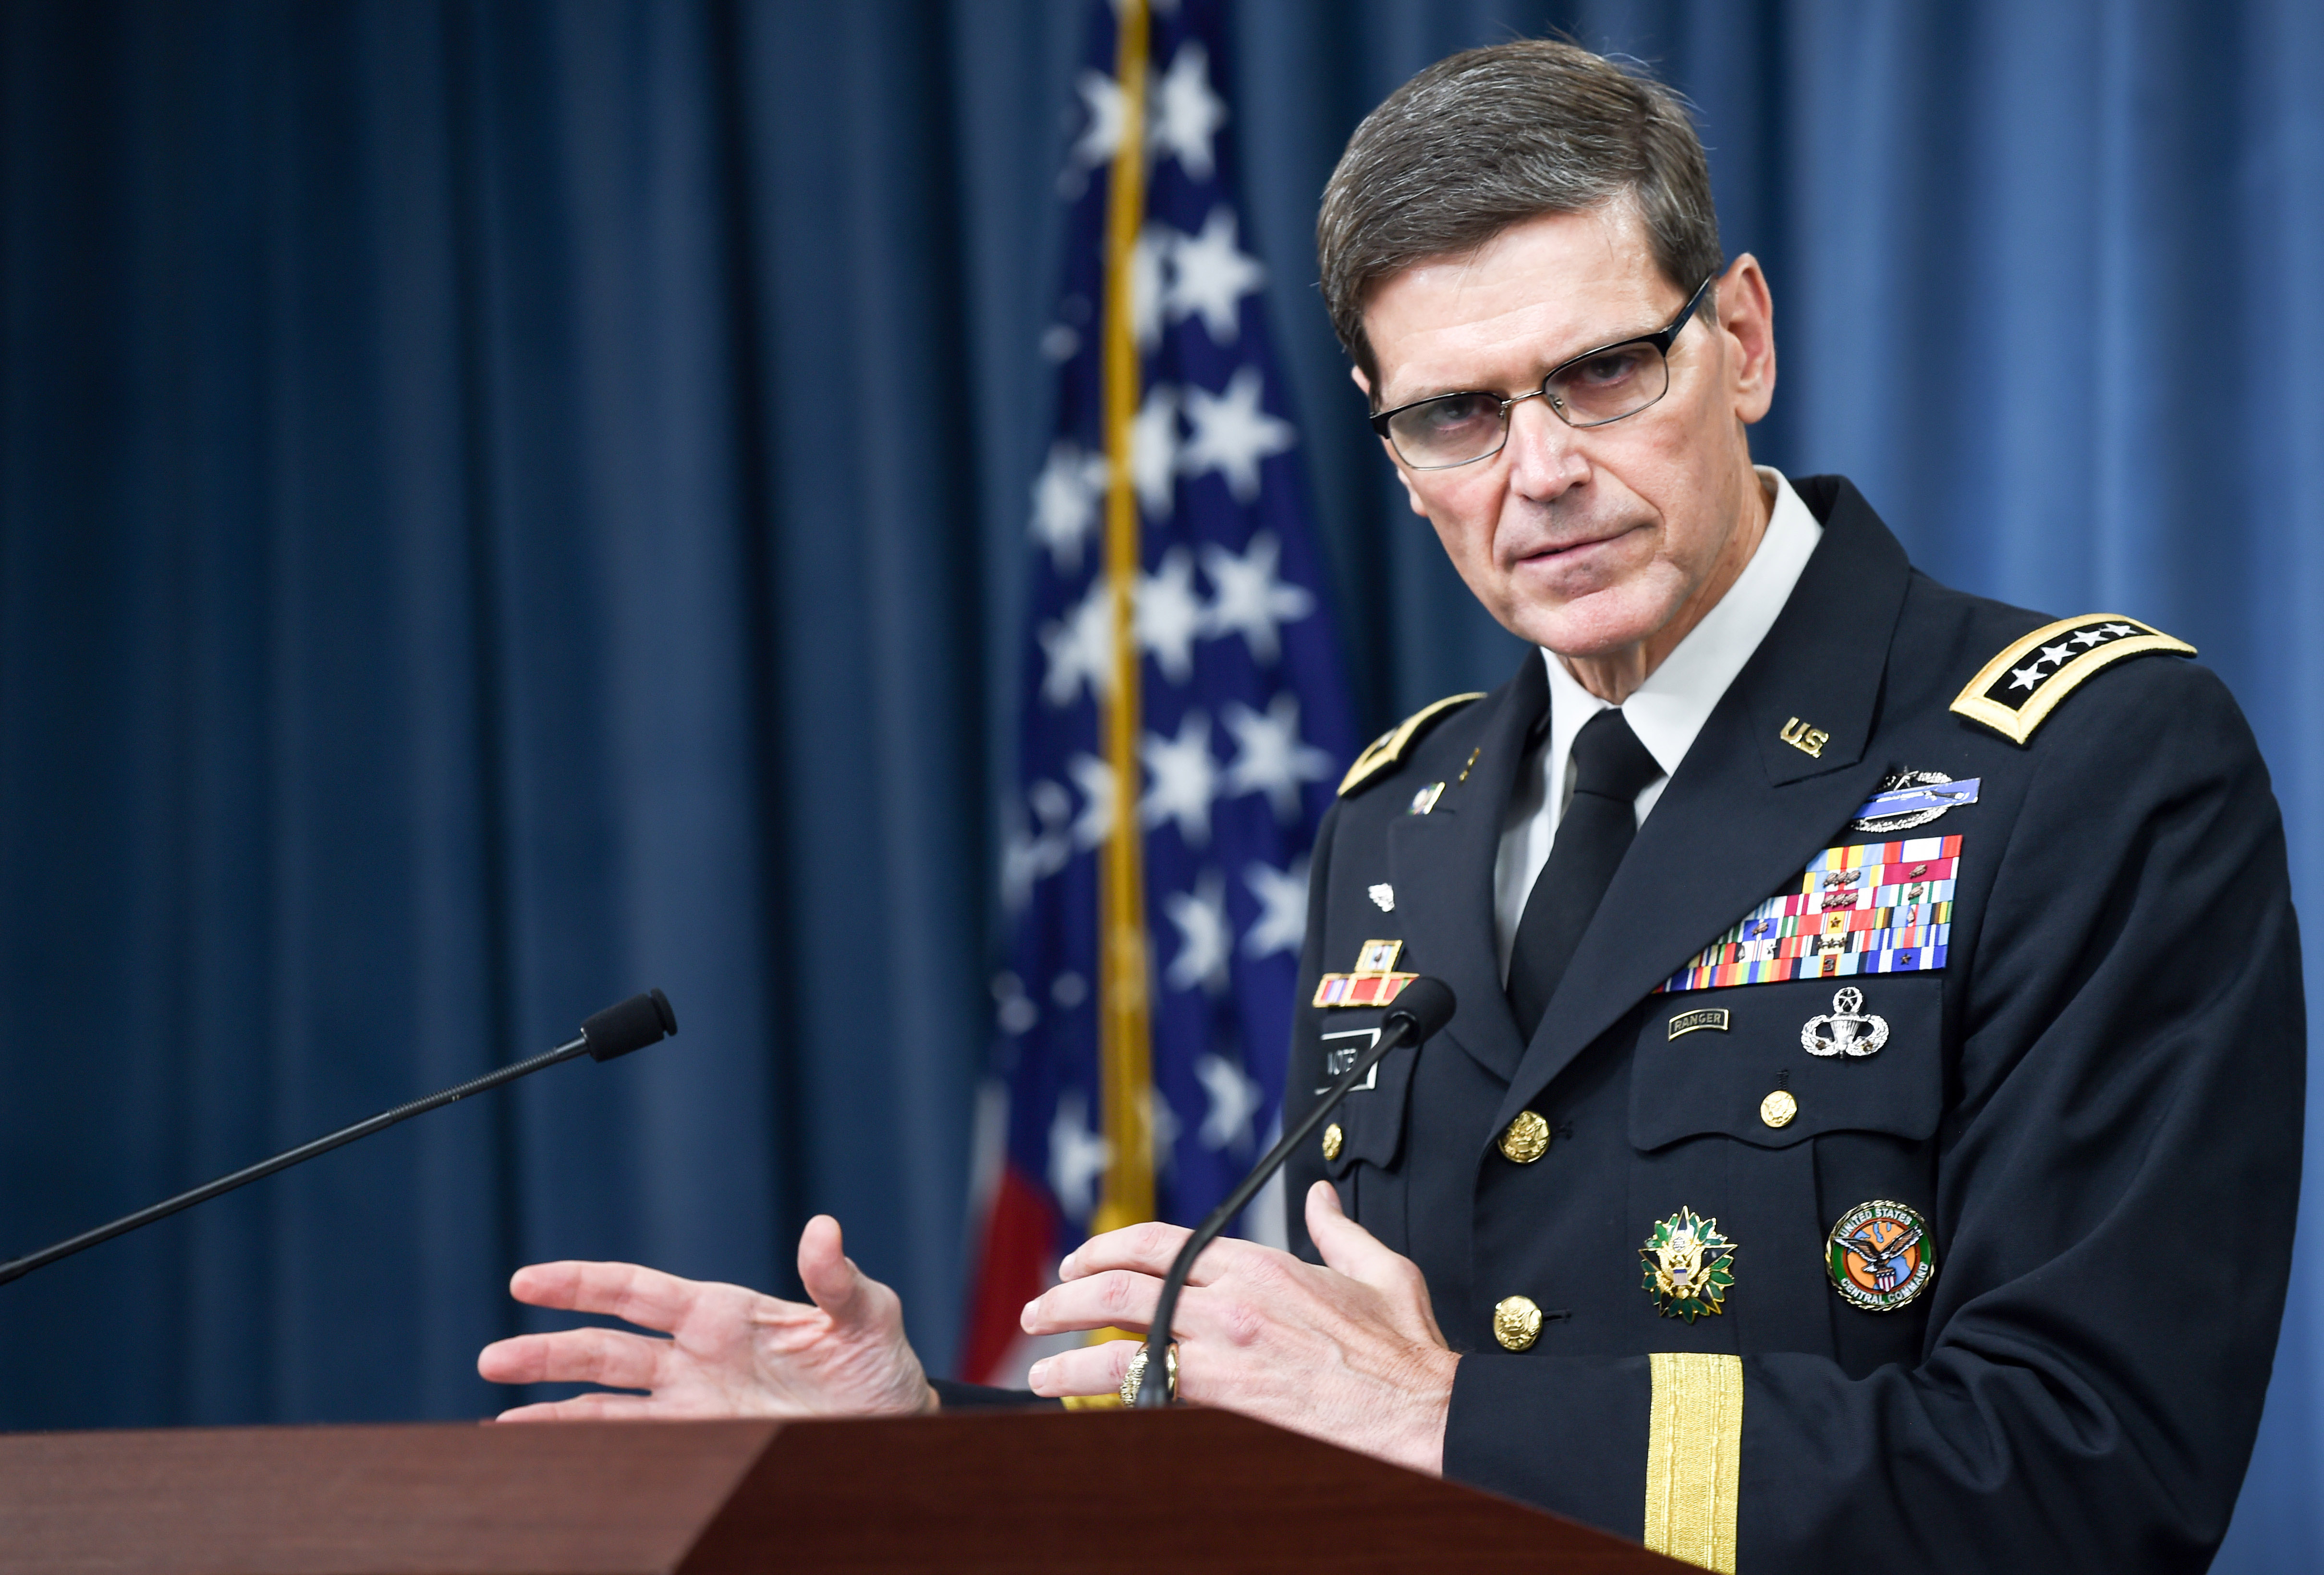 This US Army photo shows General Joseph L. Votel, commander, US Central Command,as he  briefs the media in the Pentagon Briefing April 29, 2016 in Washington,DC.  Votel discussed the release of the US Forces-Afghanistan investigation into the US airstrike on the Doctors Without Borders trauma center in Kunduz, Afghanistan, on October 3, 2015. US forces attacked a Doctors Without Borders hospital in the Afghan city of Kunduz last year after a series of errors and will be disciplined, but they did not commit a war crime, their commander said Friday. / AFP PHOTO / US ARMY / SGT. 1ST CLASS CLYDELL KINCHEN / RESTRICTED TO EDITORIAL USE - MANDATORY CREDIT "AFP PHOTO / Sgt. 1st class Clydell Kinchen/US ARMY" - NO MARKETING NO ADVERTISING CAMPAIGNS - DISTRIBUTED AS A SERVICE TO CLIENTS